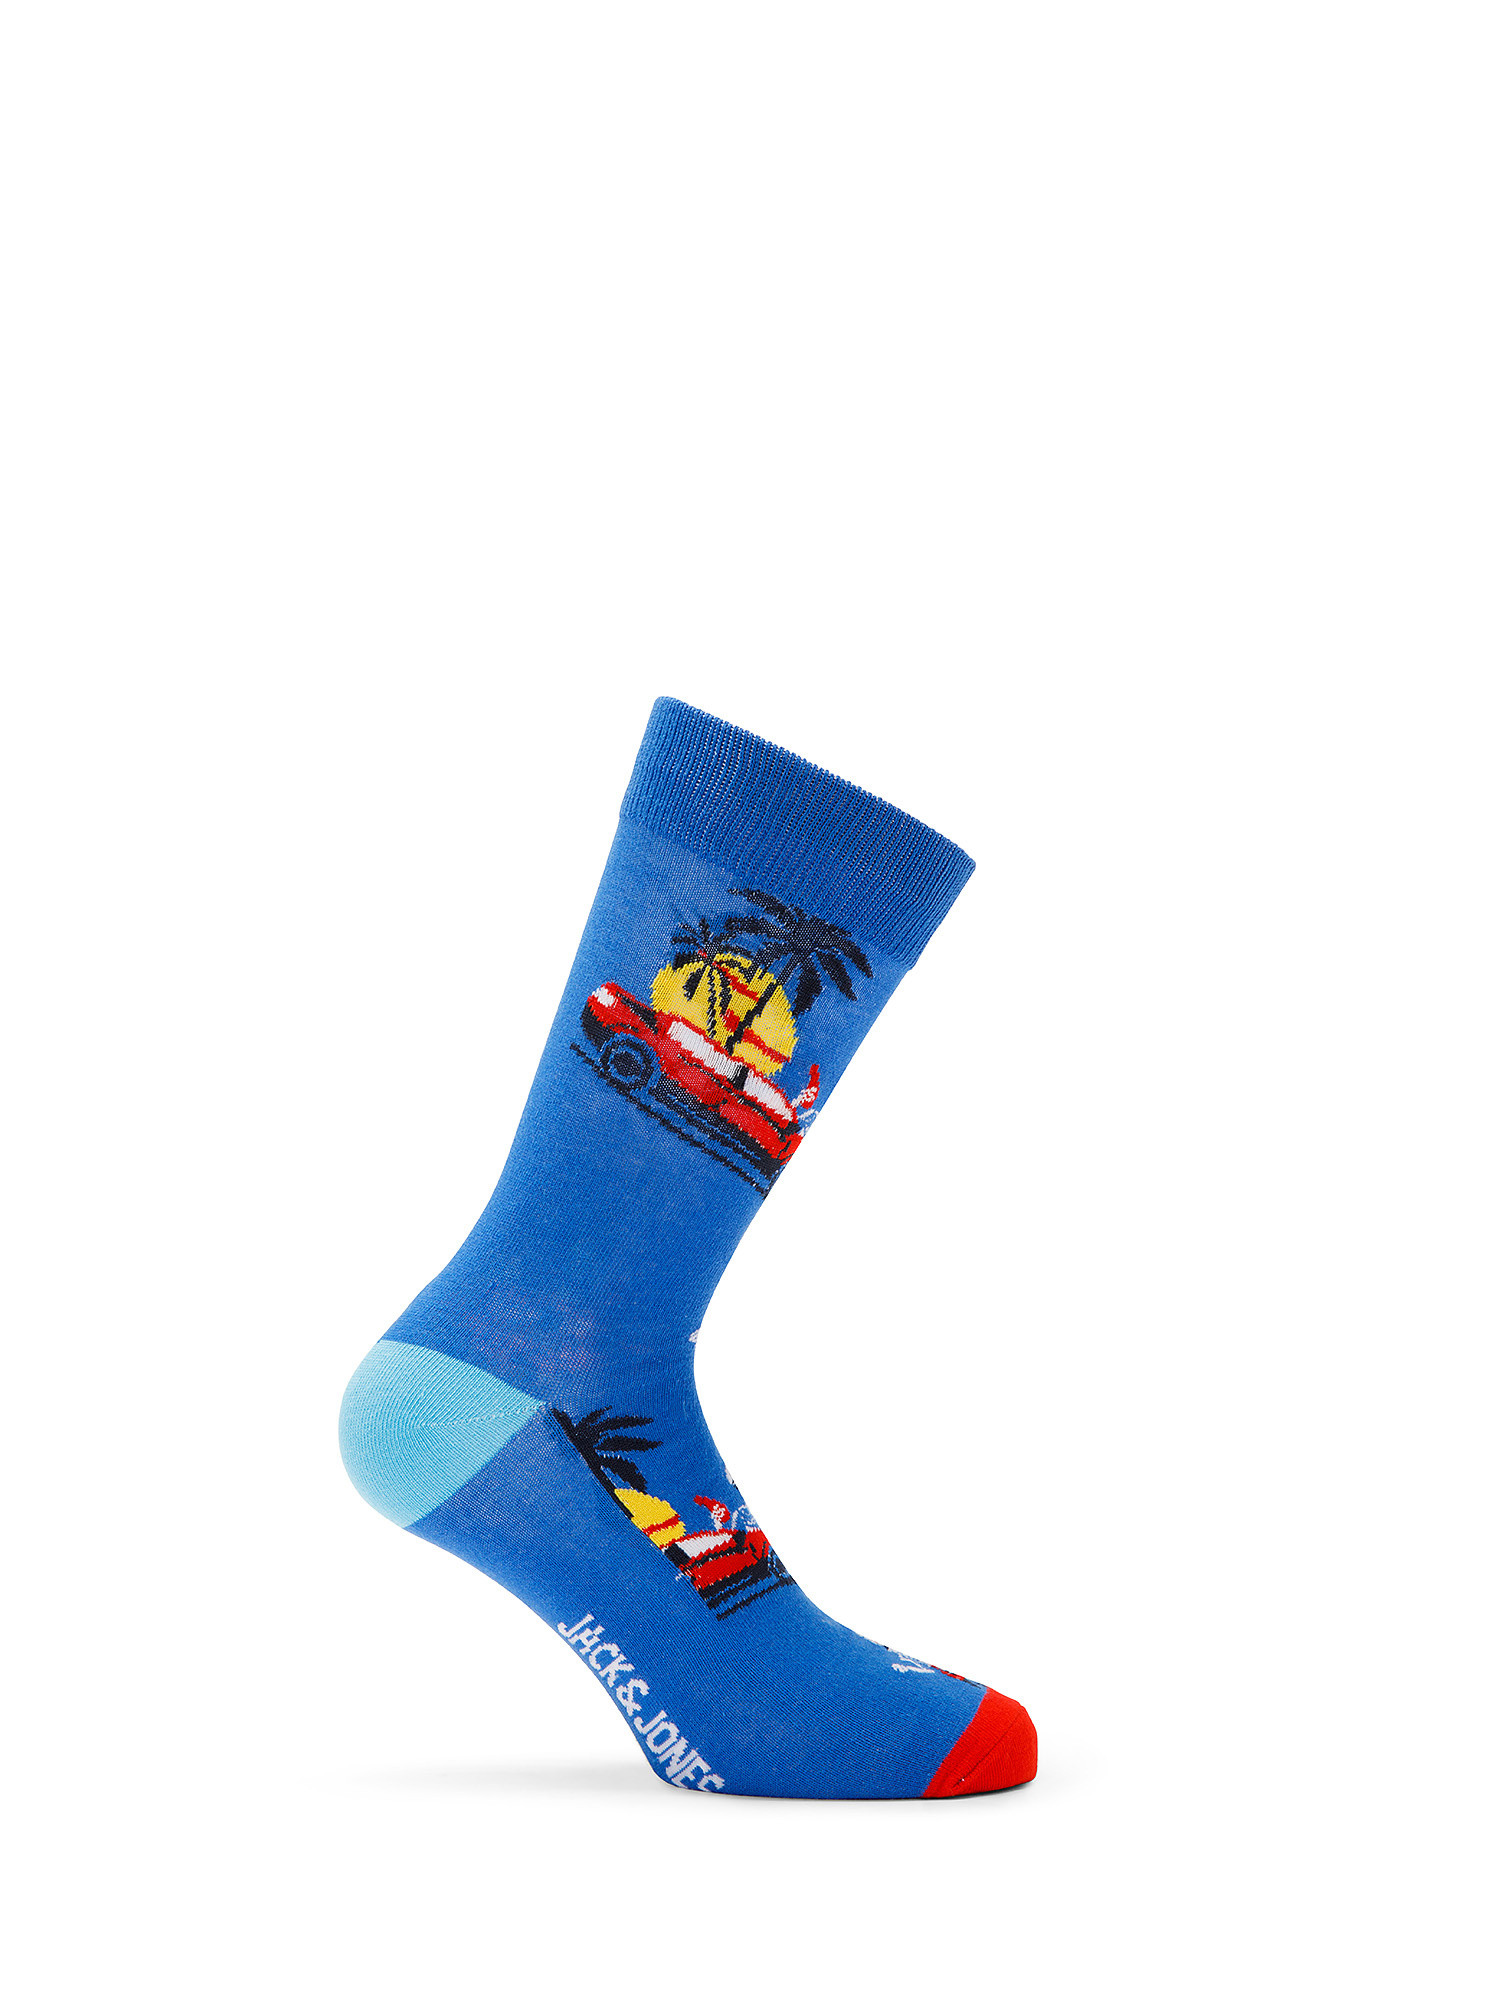 Casual socks with high cuff, Blue Cornflower, large image number 1